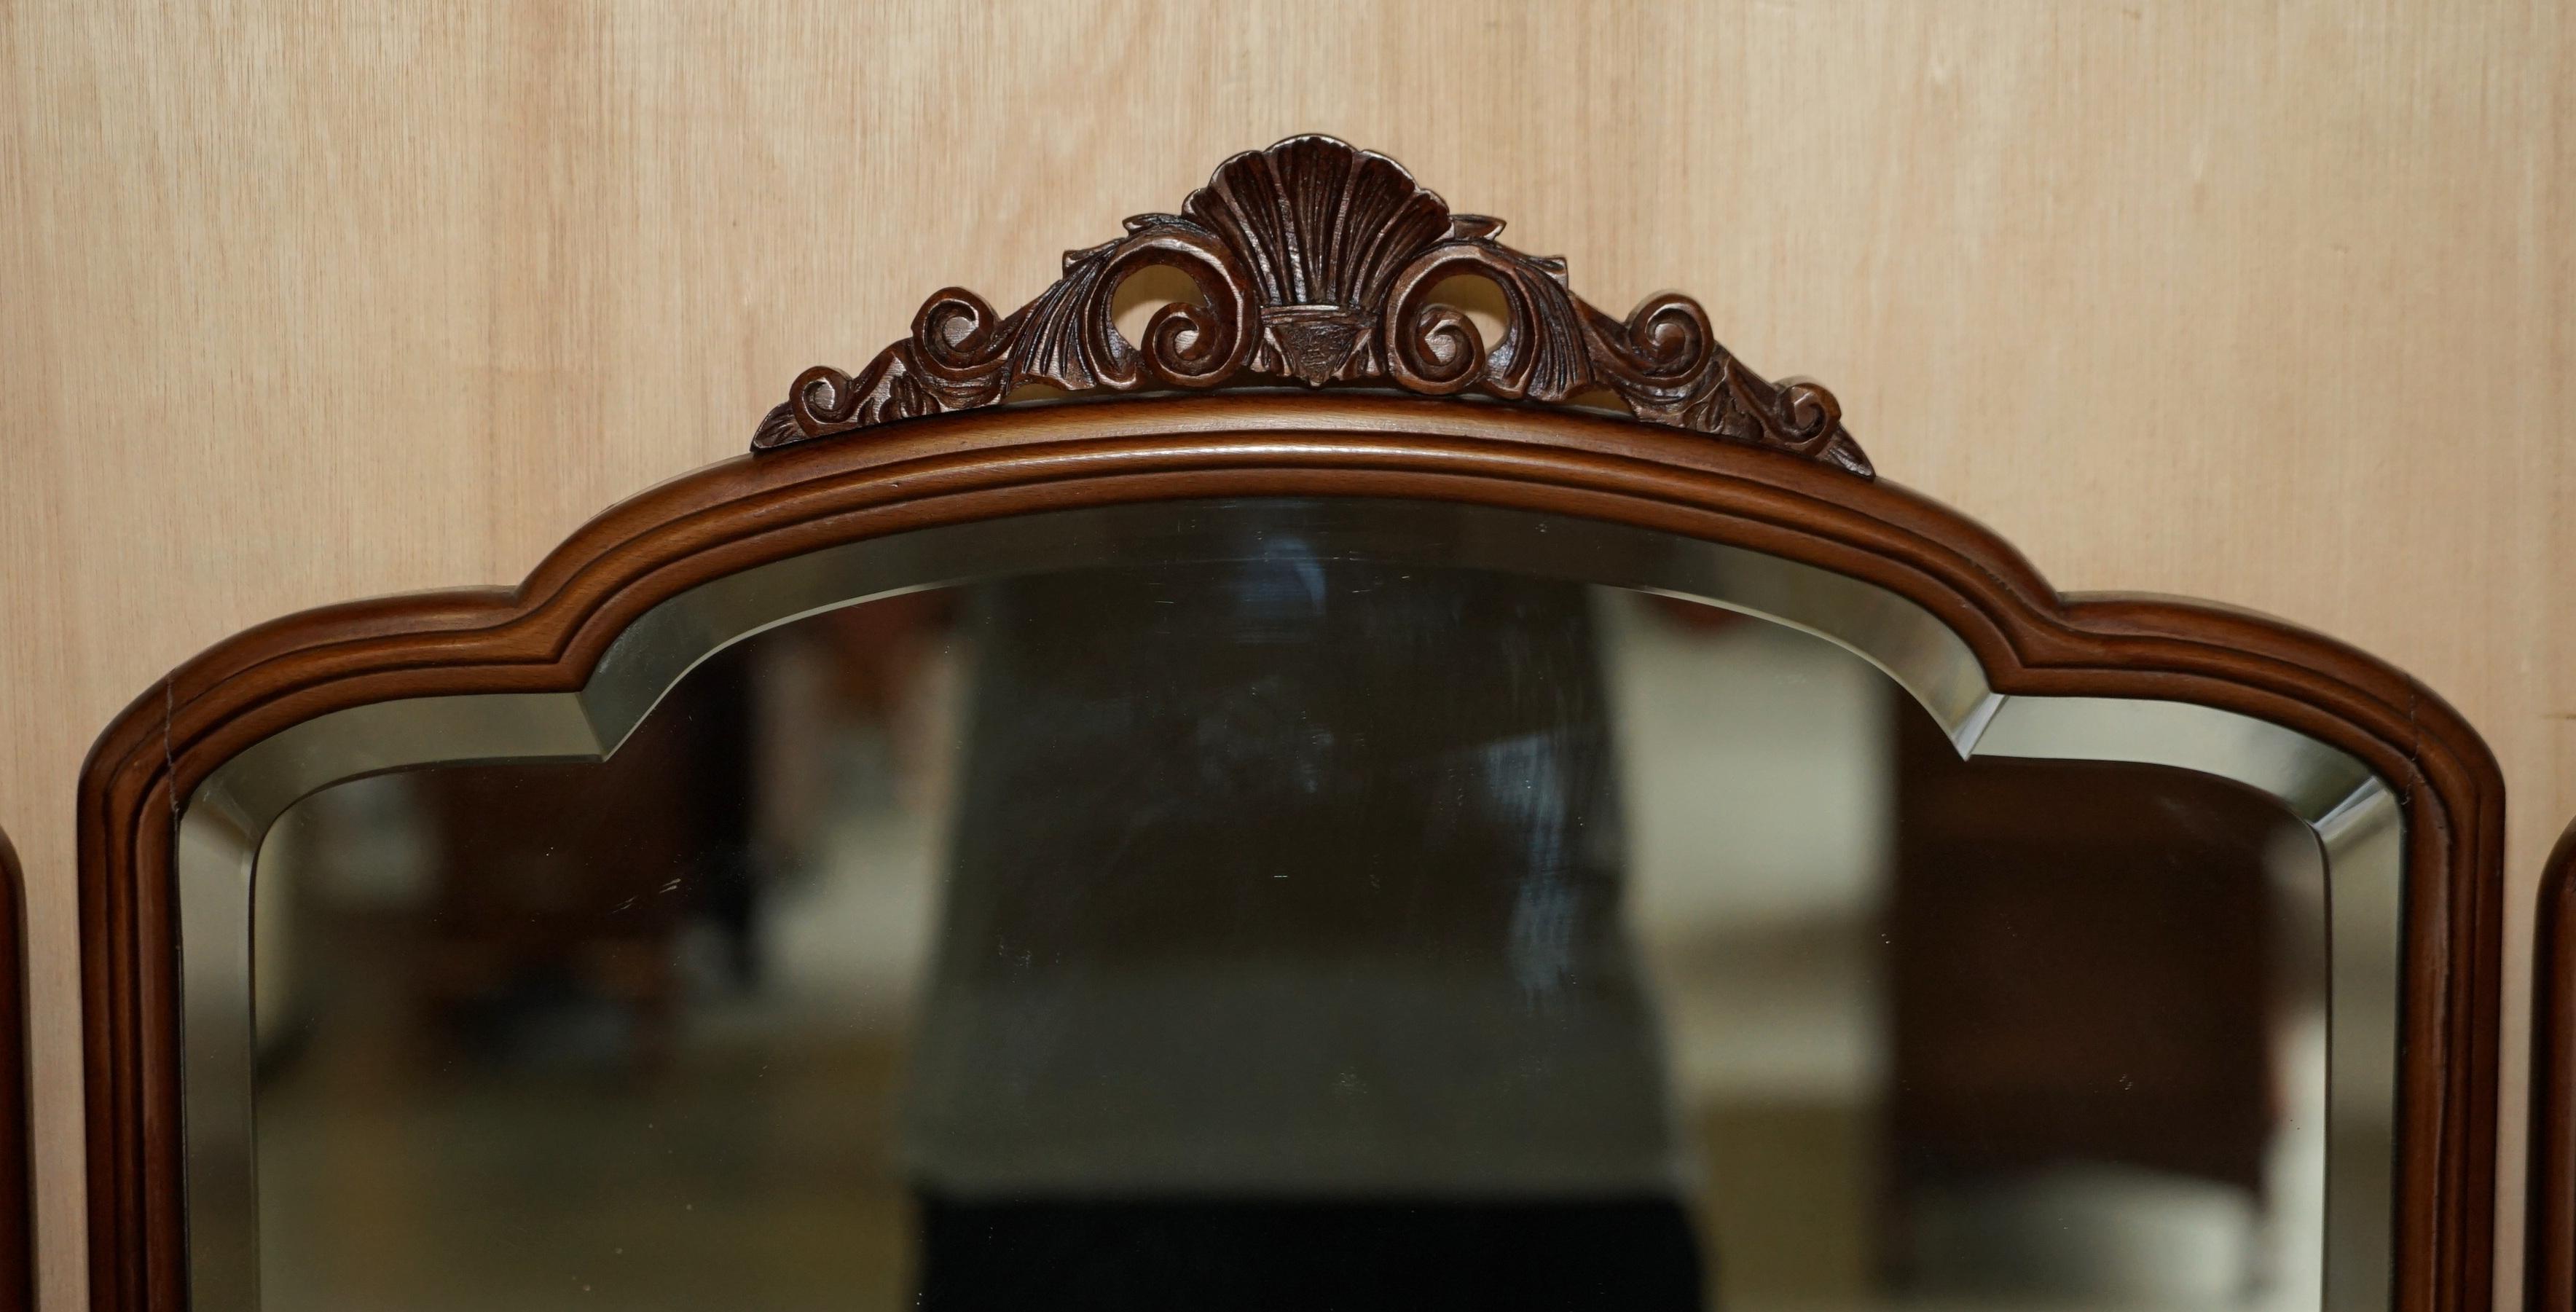 English Antique Burr Walnut Dressing Table Sublime Quality with Trifolding Mirrors